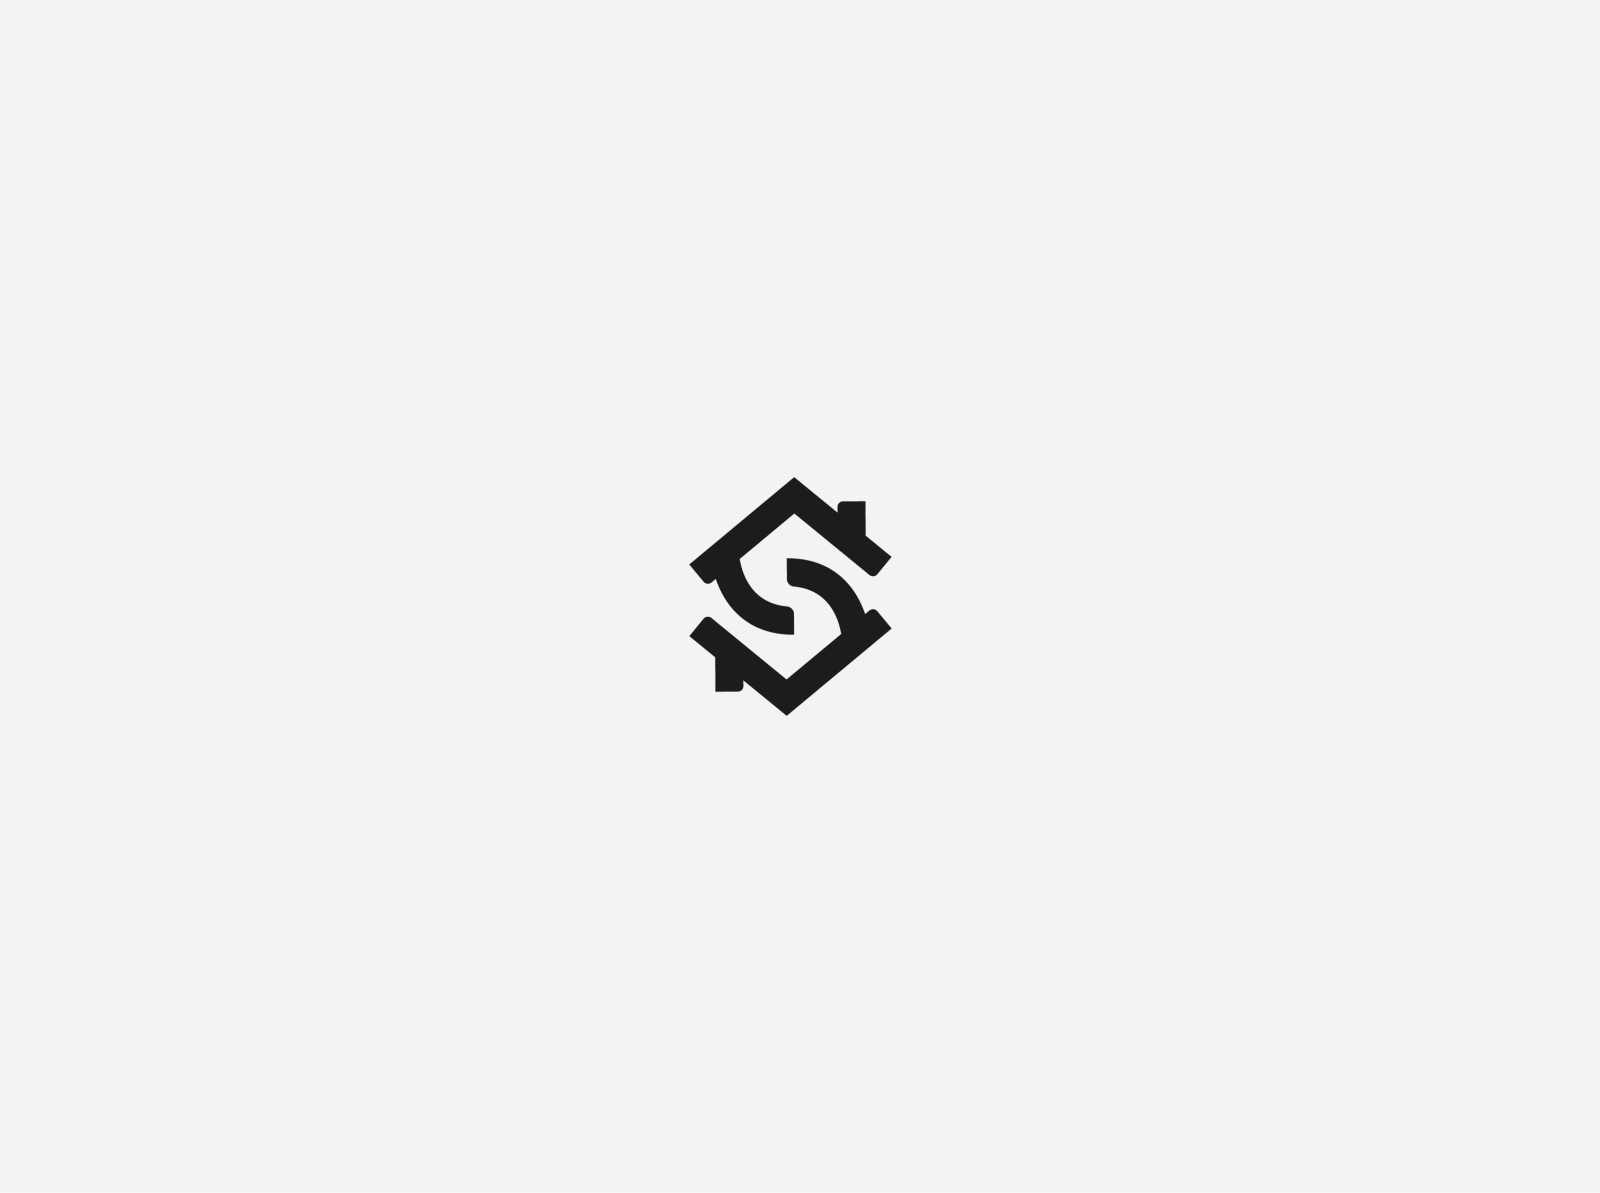 S letter + House Concept logo by Diversity on Dribbble